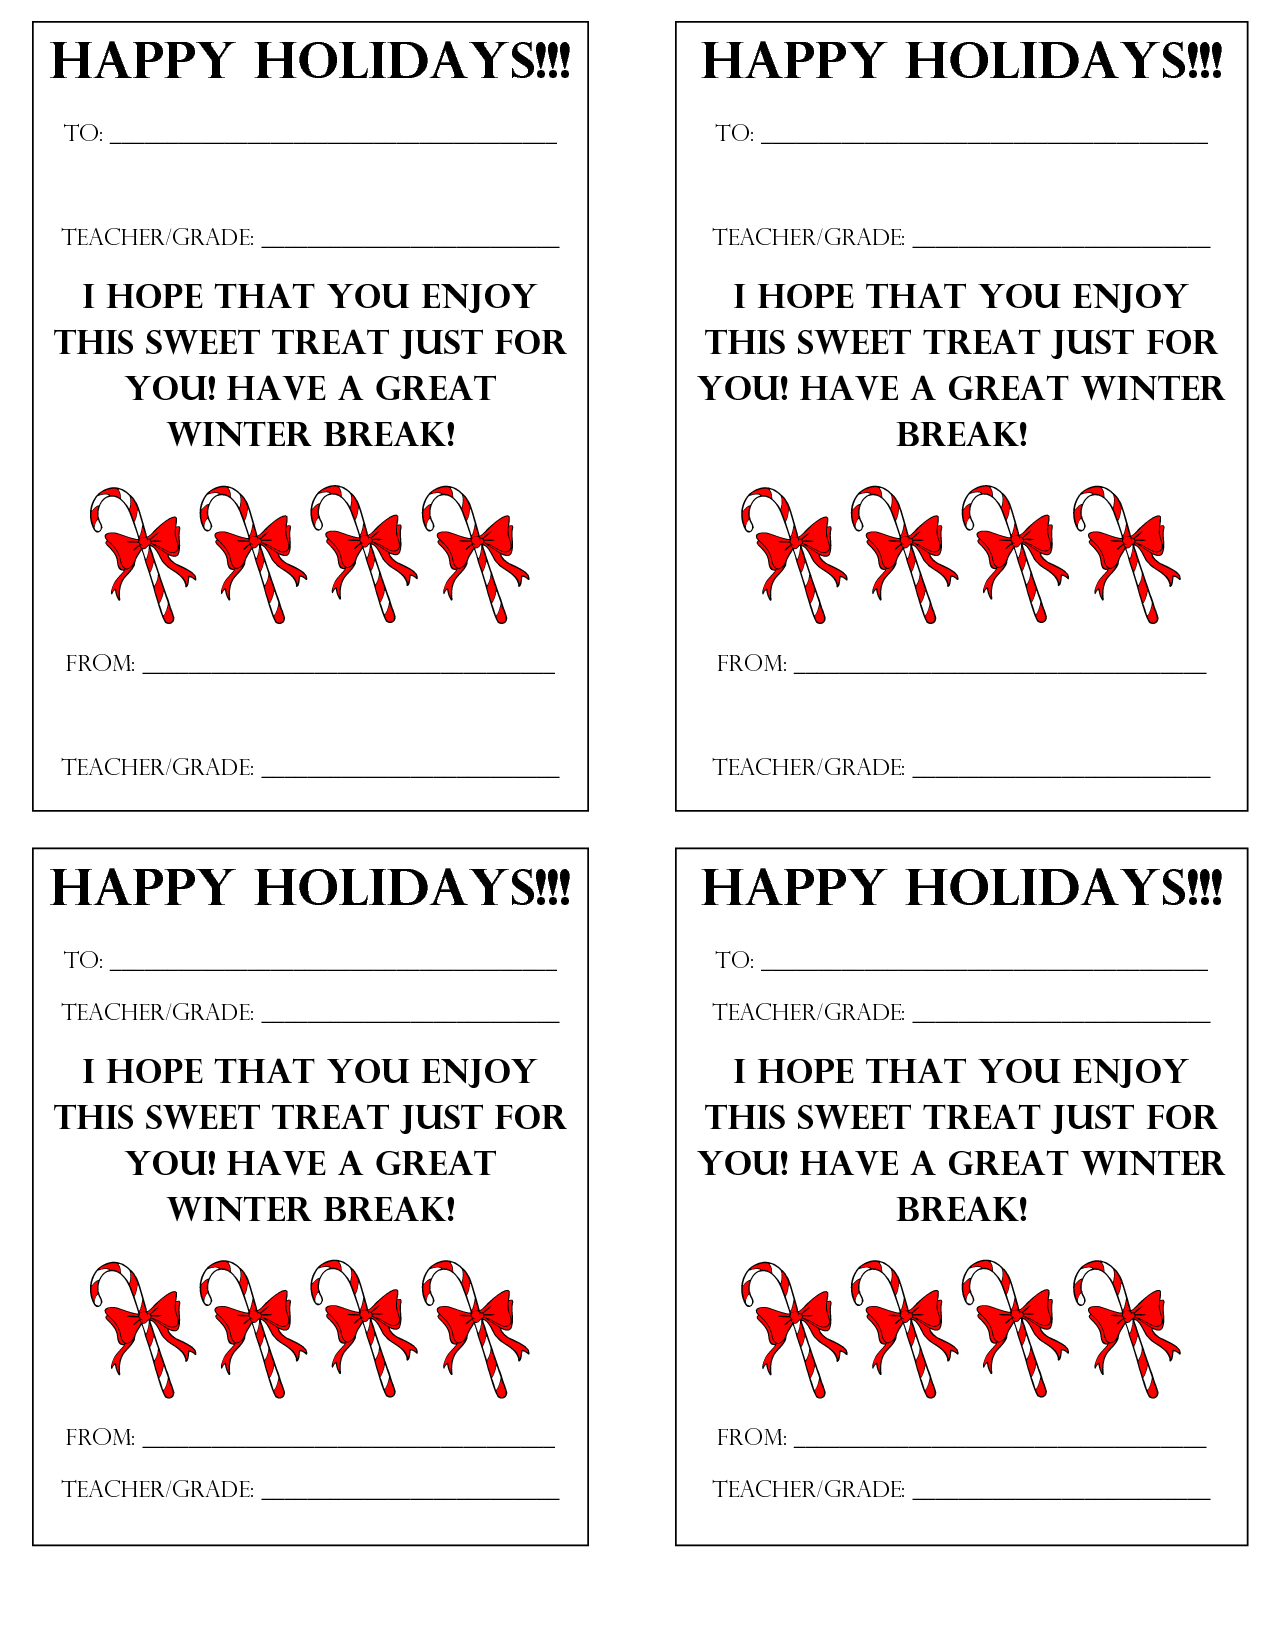 6 Best Images of Holiday Grams Printable Printable Candy Gram Tags